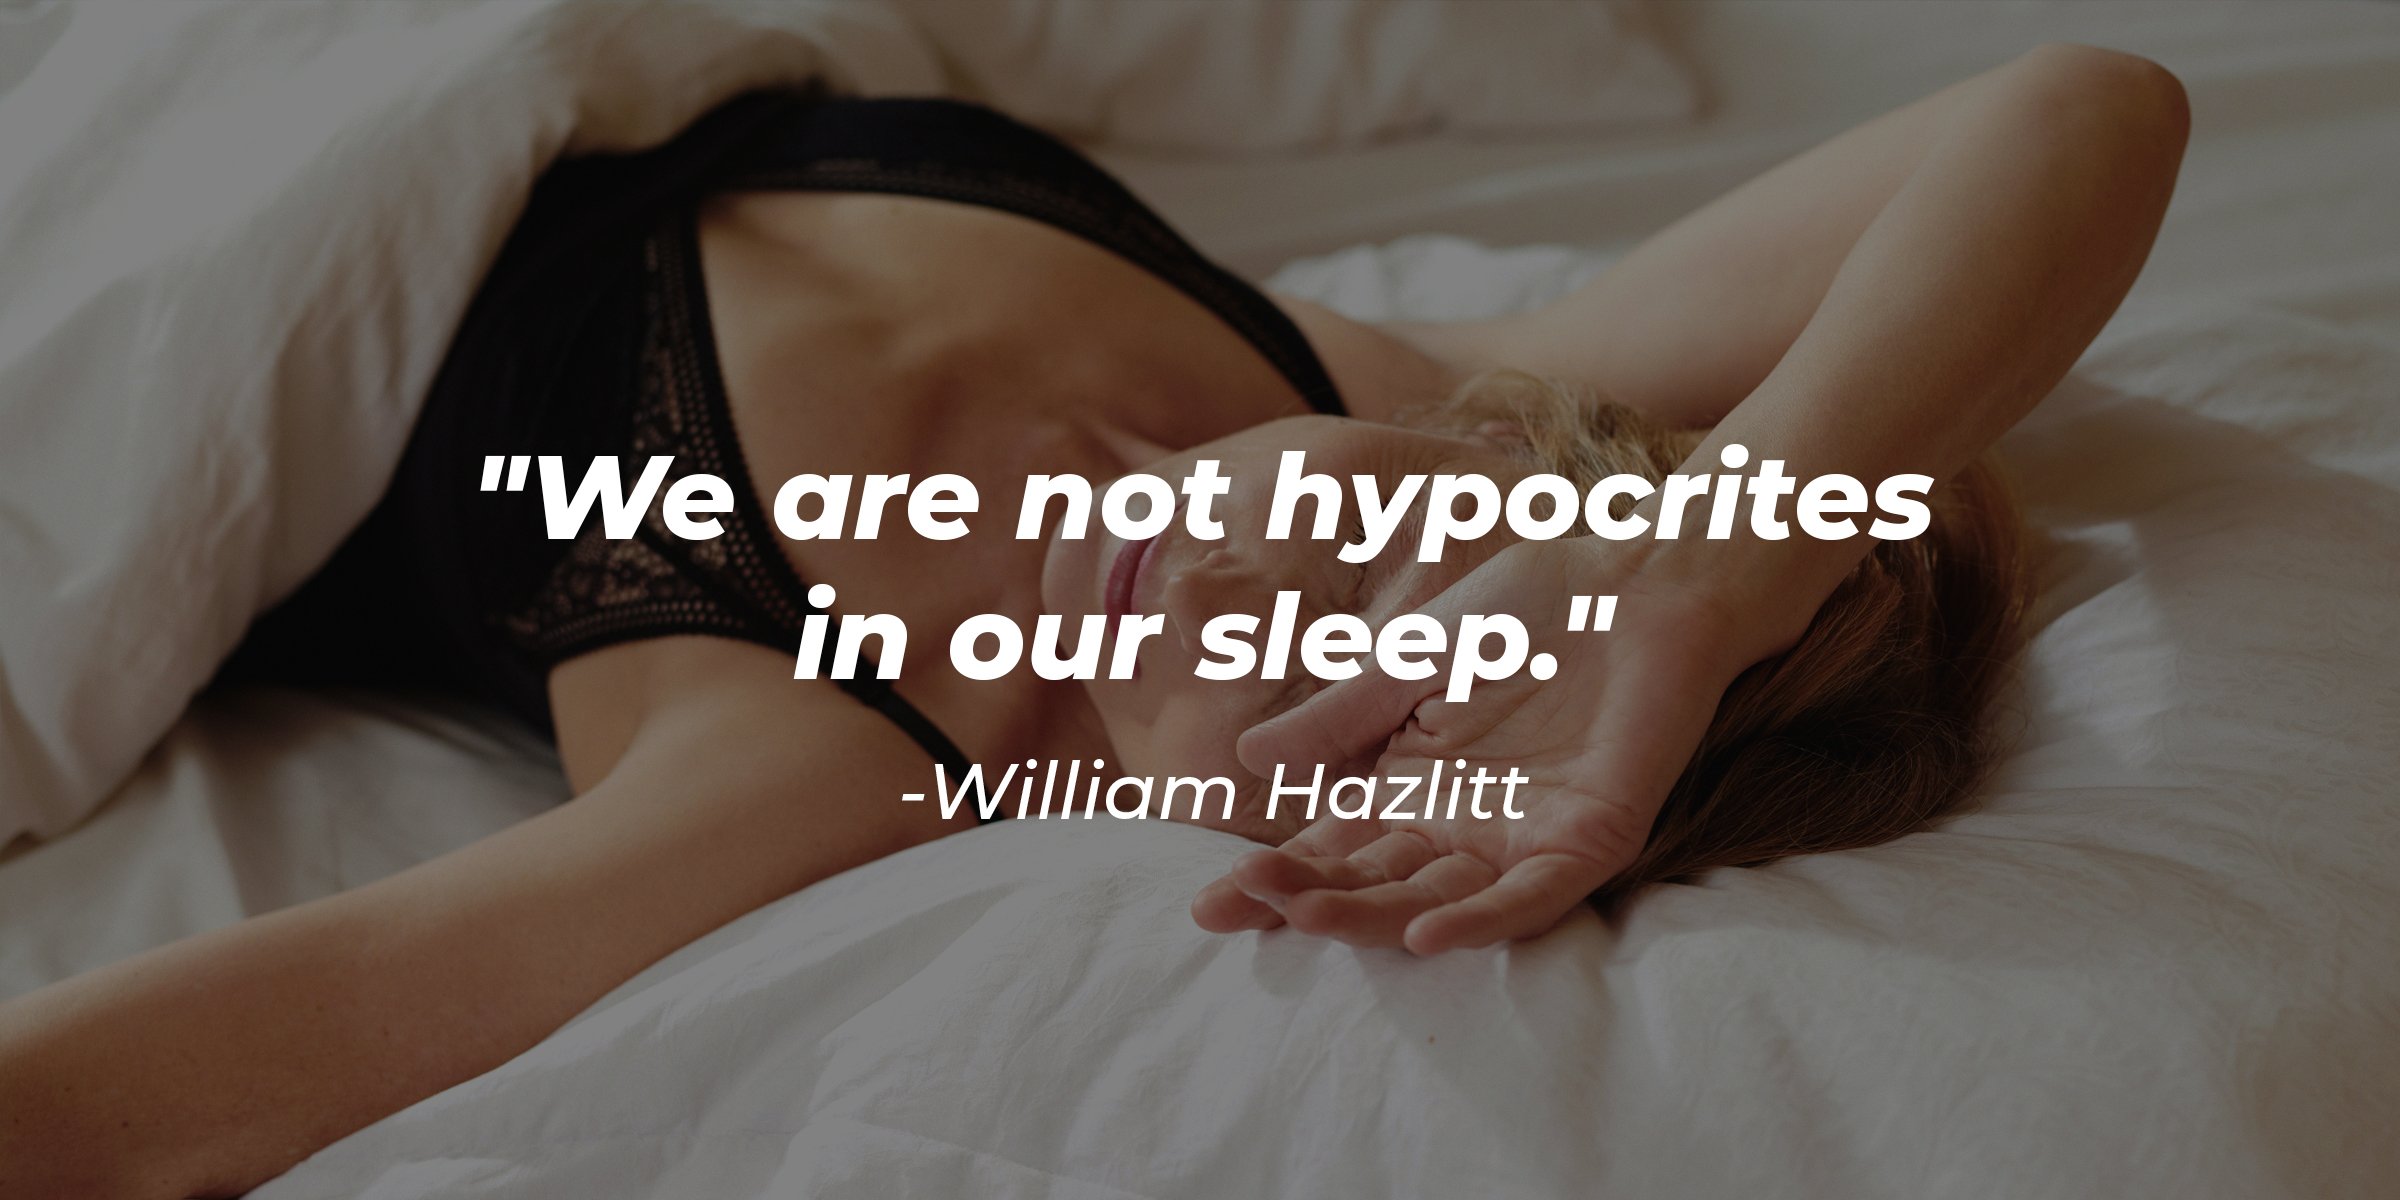 Source: Unsplash | A woman in bed with the quote: "We are not hypocrites in our sleep."